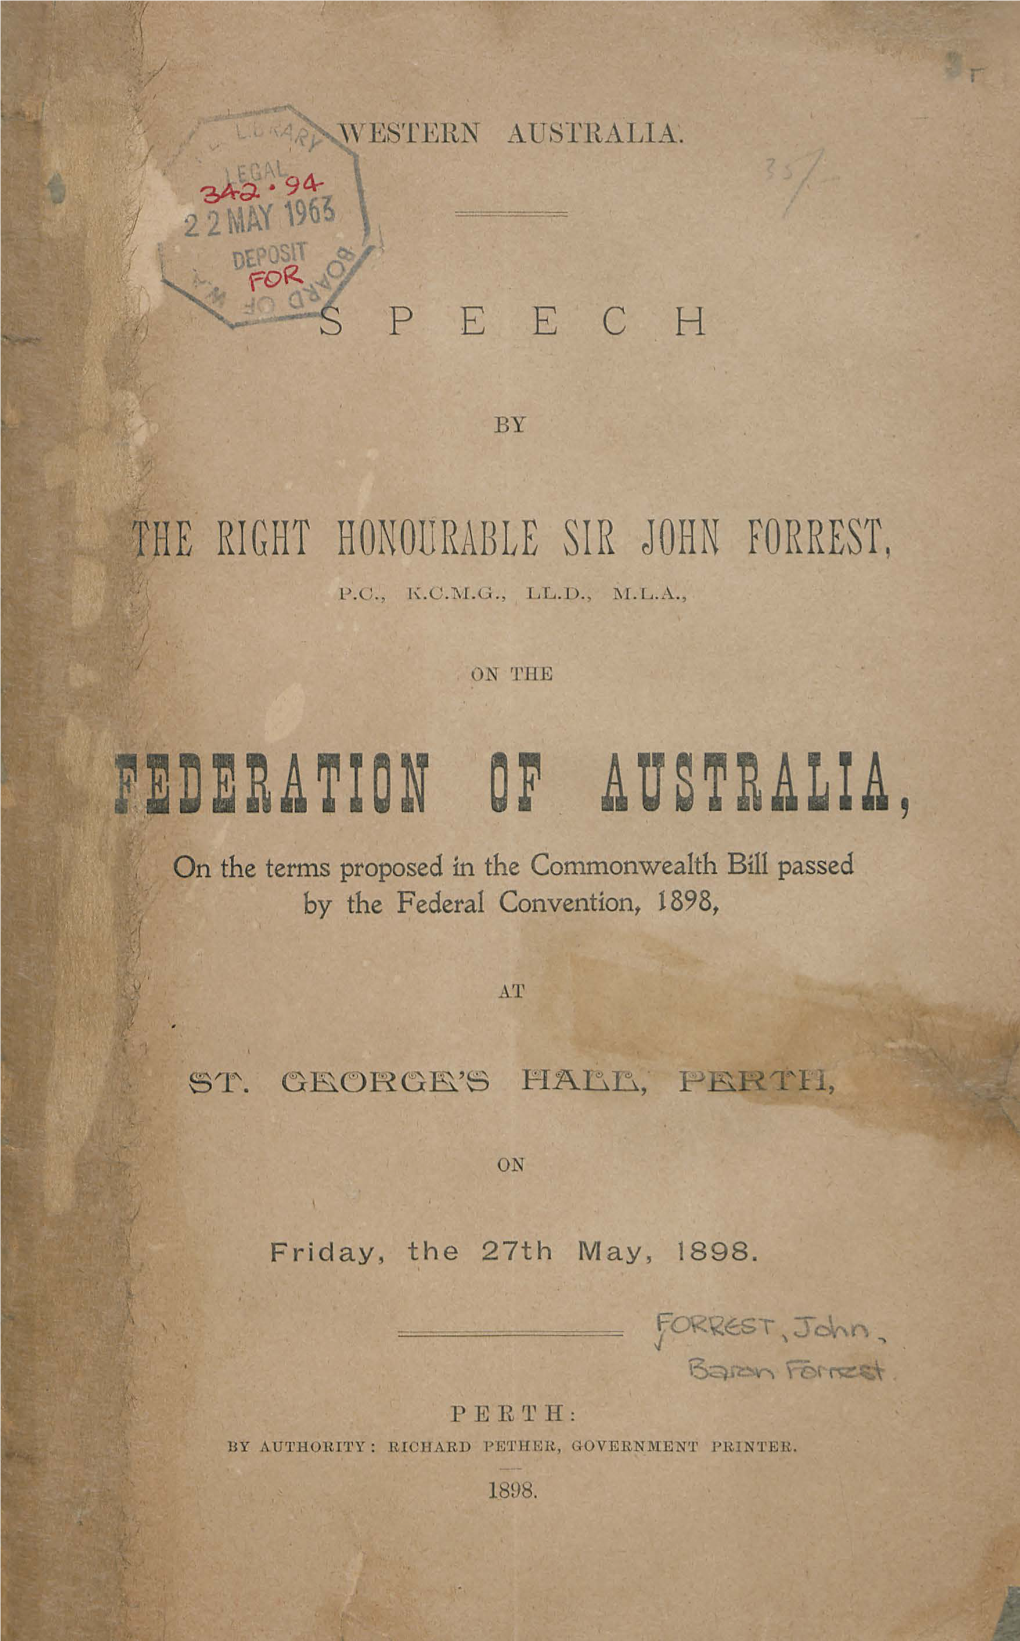 FEDERATION of AUSTBALIA, , on the Terms Proposed in the Commonwealth Bill Passed by the Federal Convention, 1898